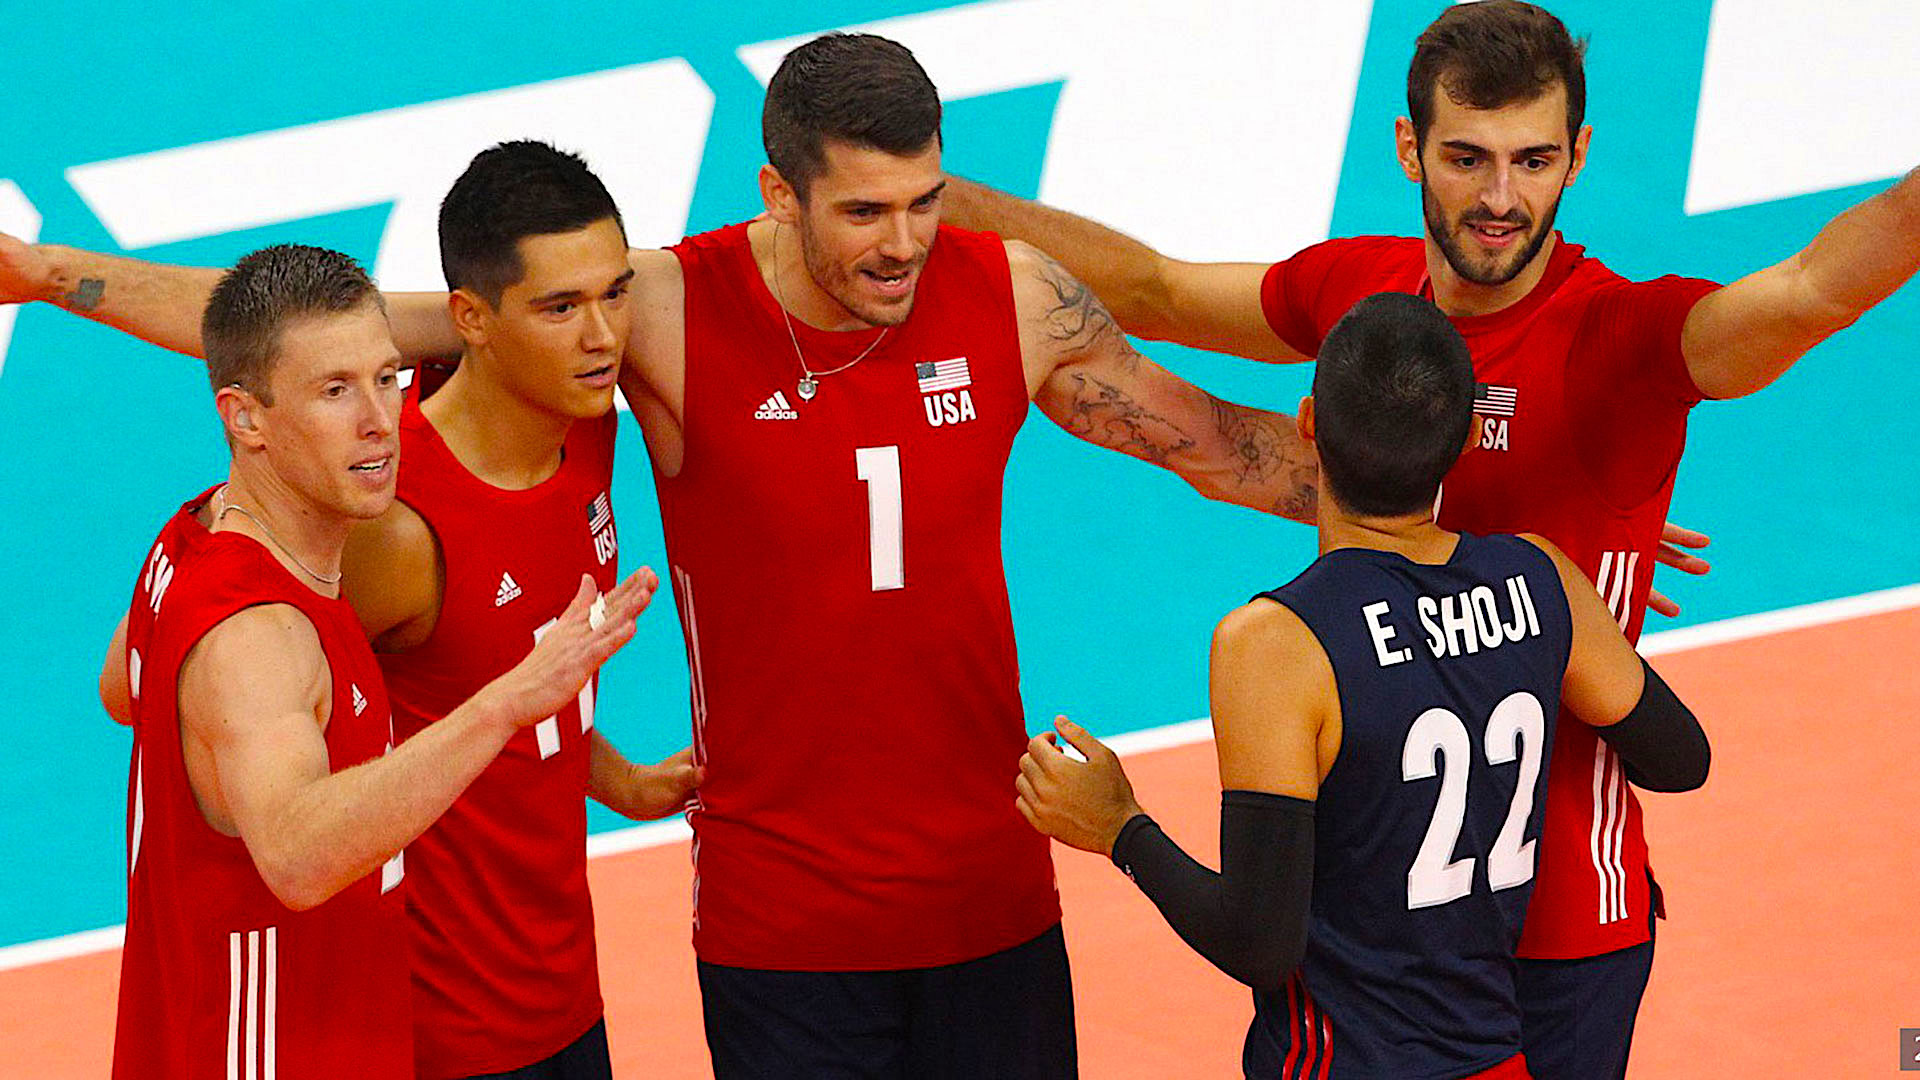 2022 FIVB Volleyball Mens World Championship VolleyCountry